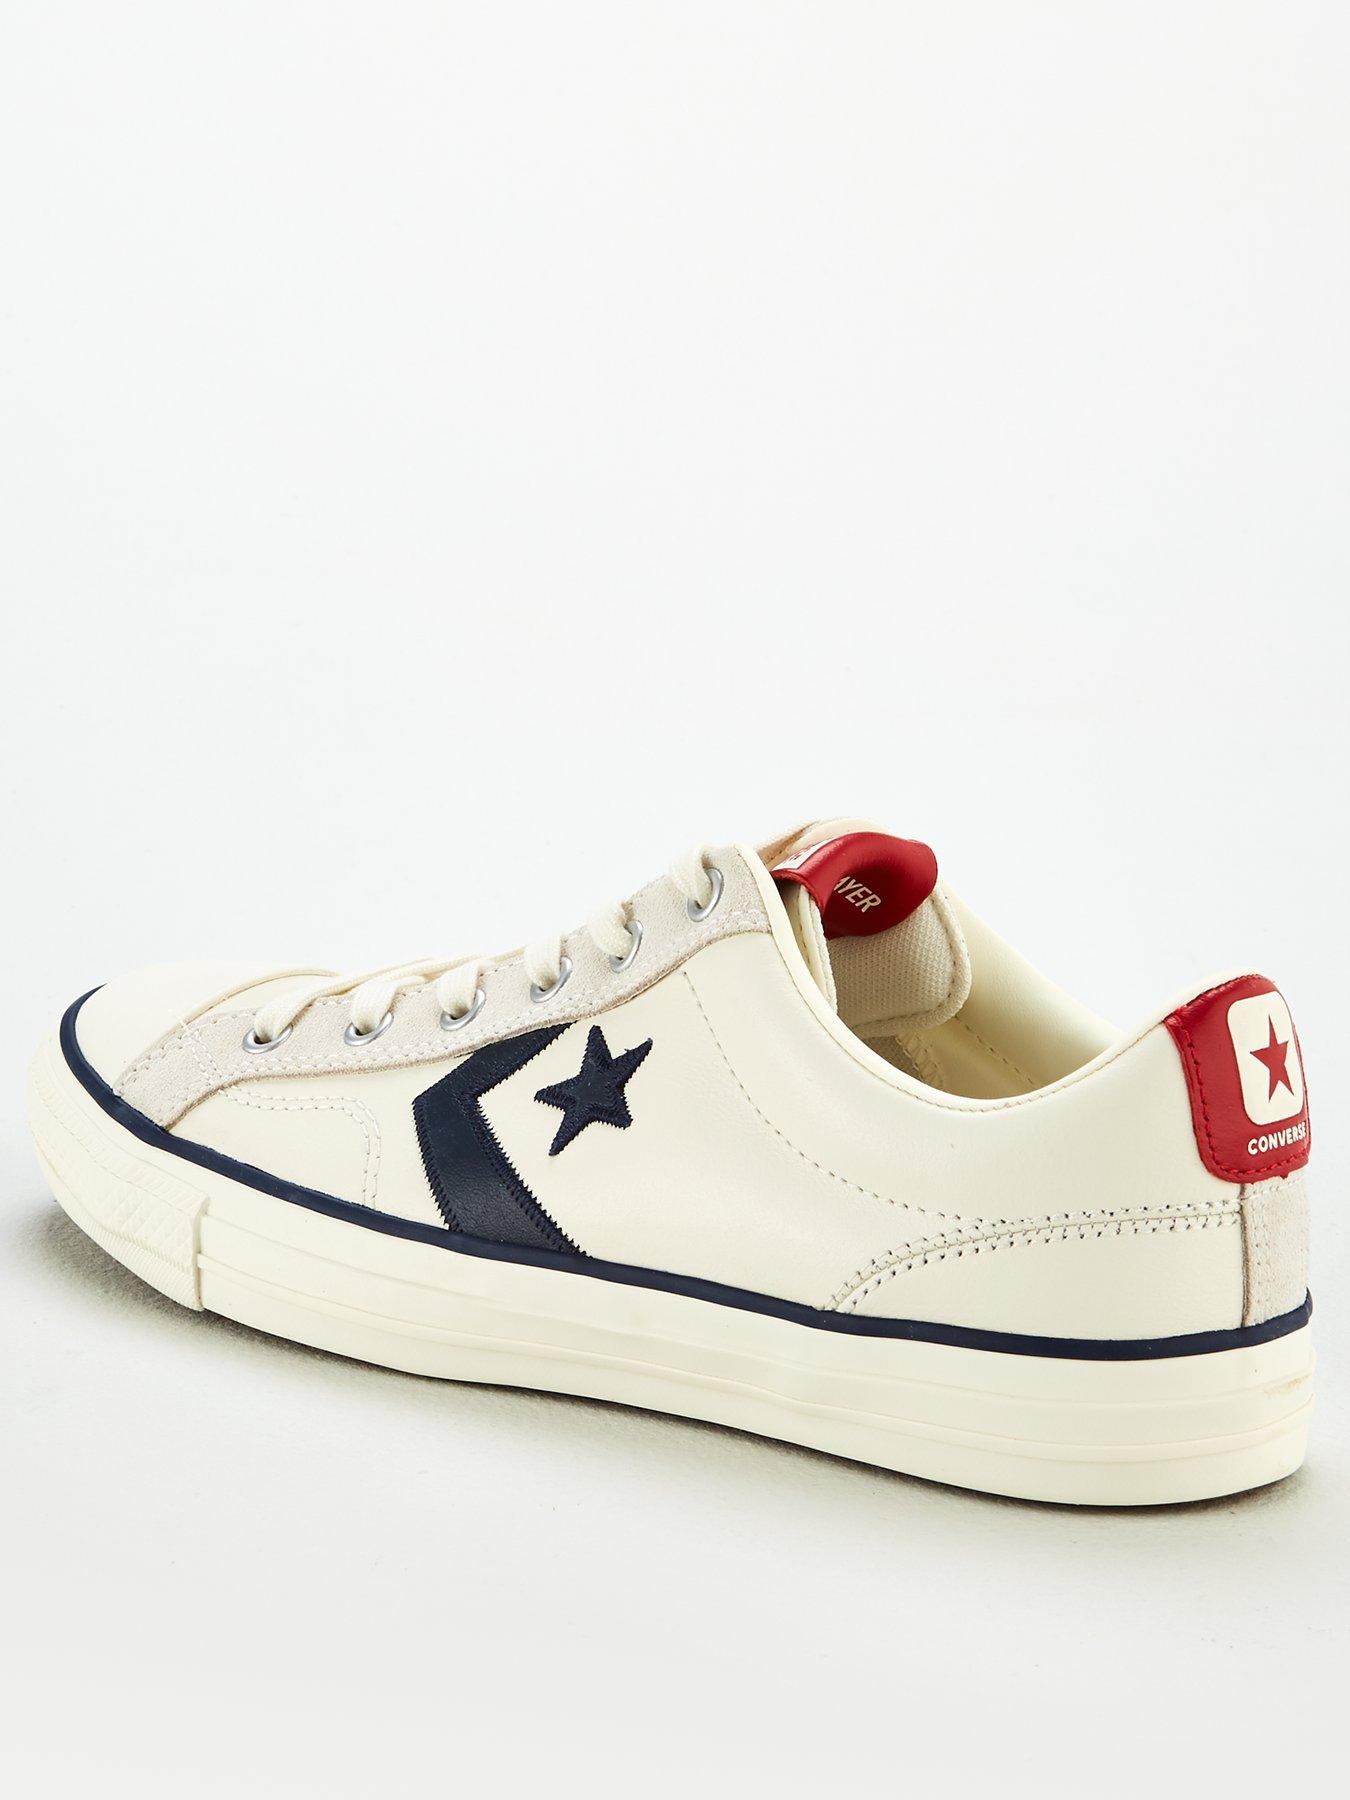 converse star player ox white leather